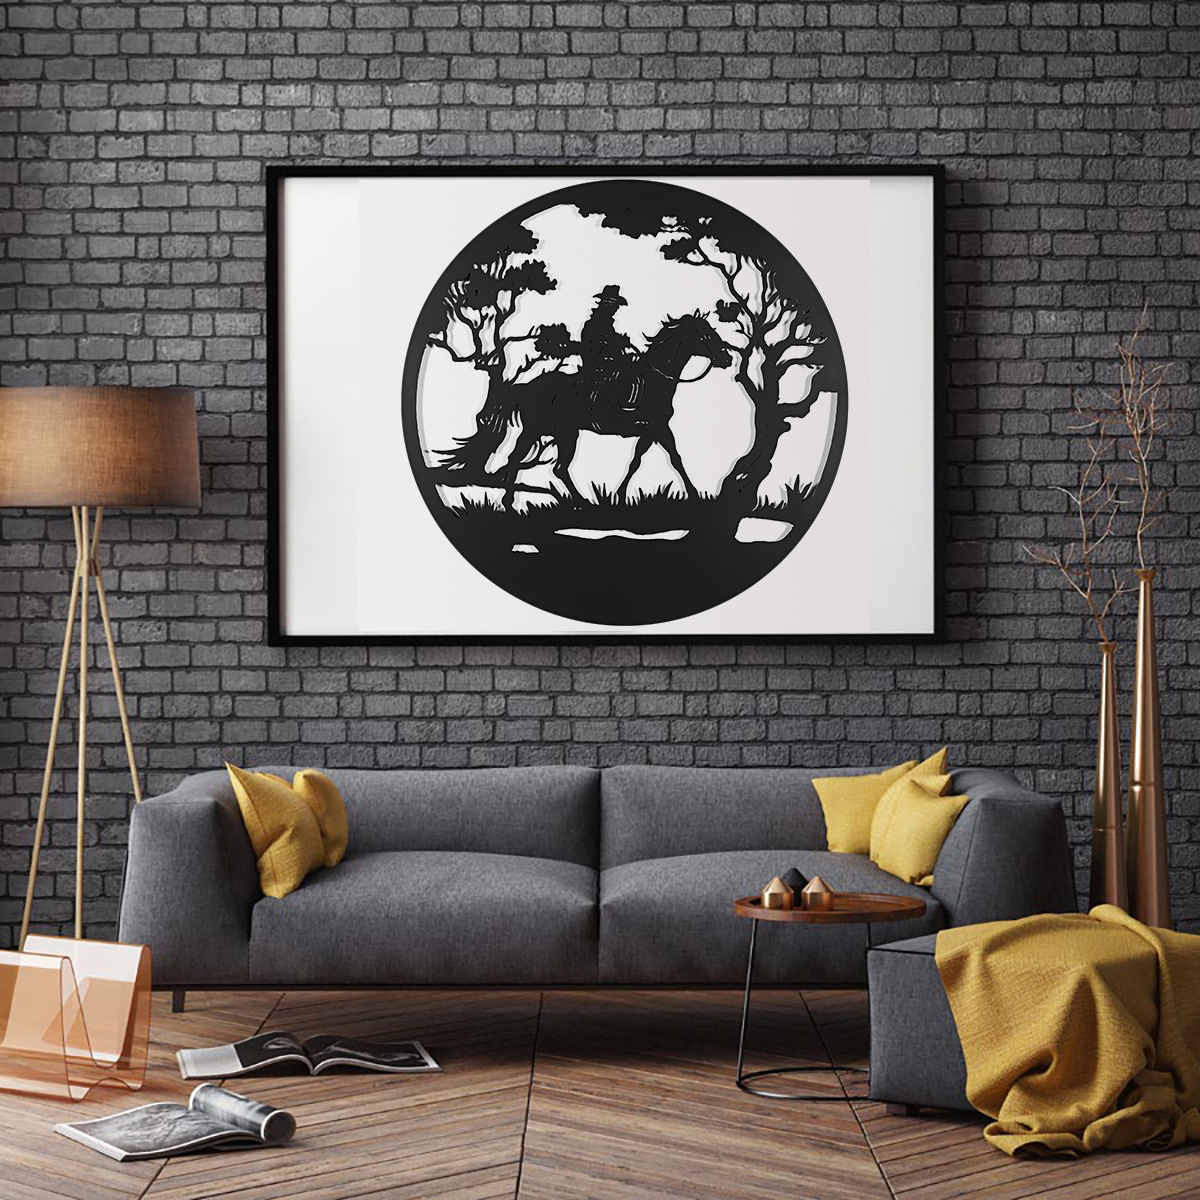 Man-Riding-Horse-In-Forest-Round-Black-Metal-Wall-Hanging-Art-Decoration-Room-1794308-4